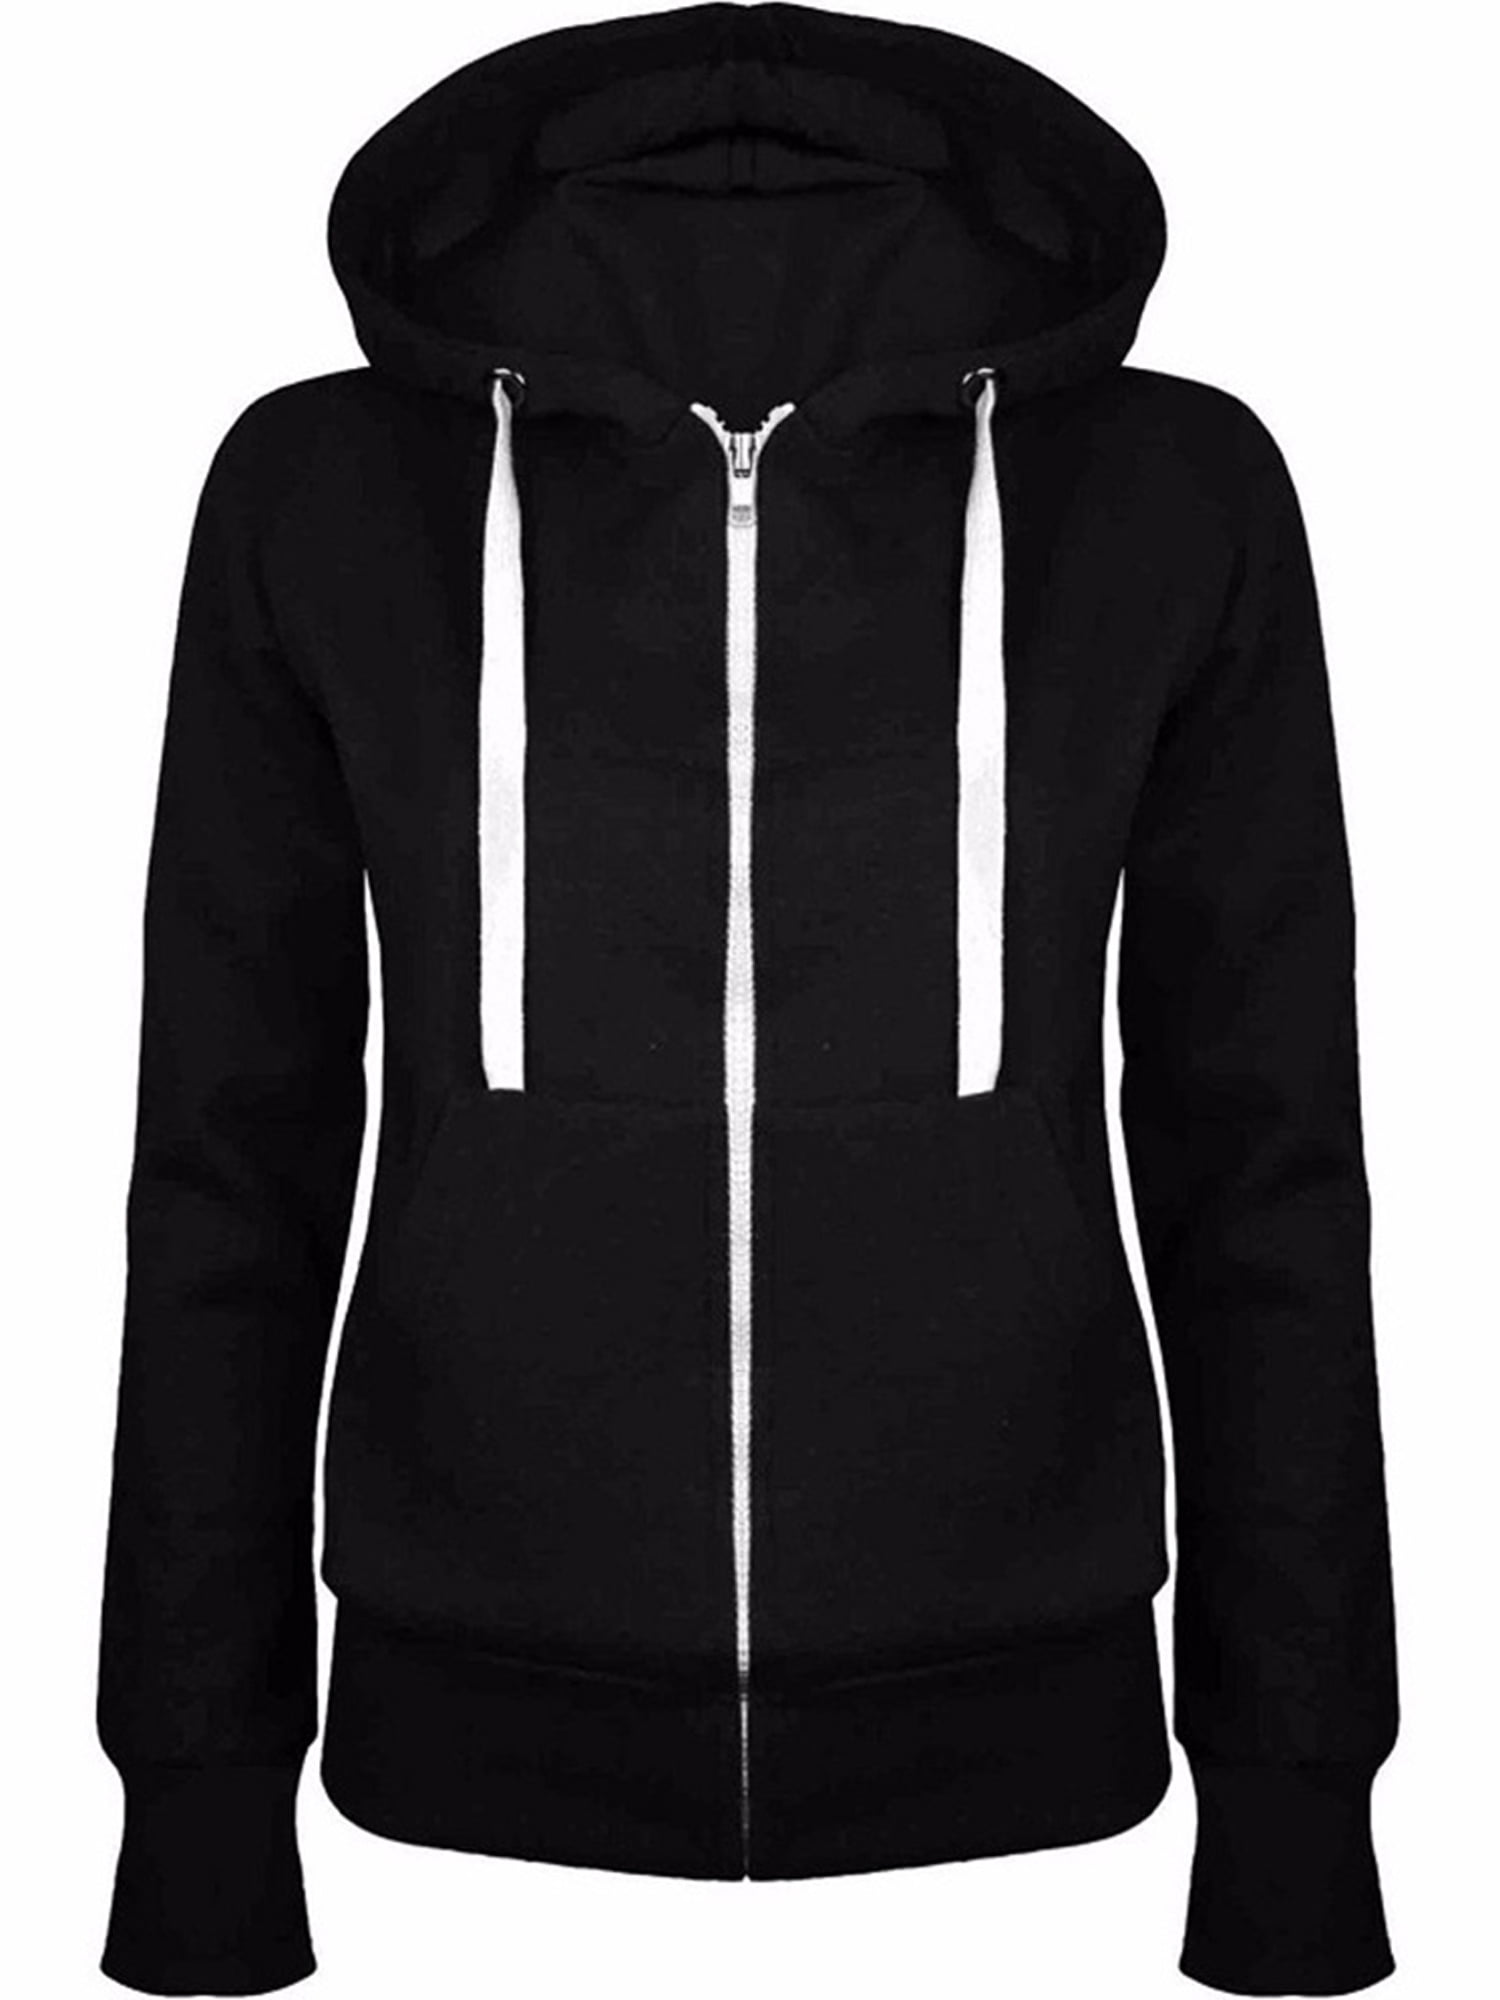 Yayu Womens Front-Zip Casual Solid Color Workout Hoodies Hooded Sweatshirt Jackets